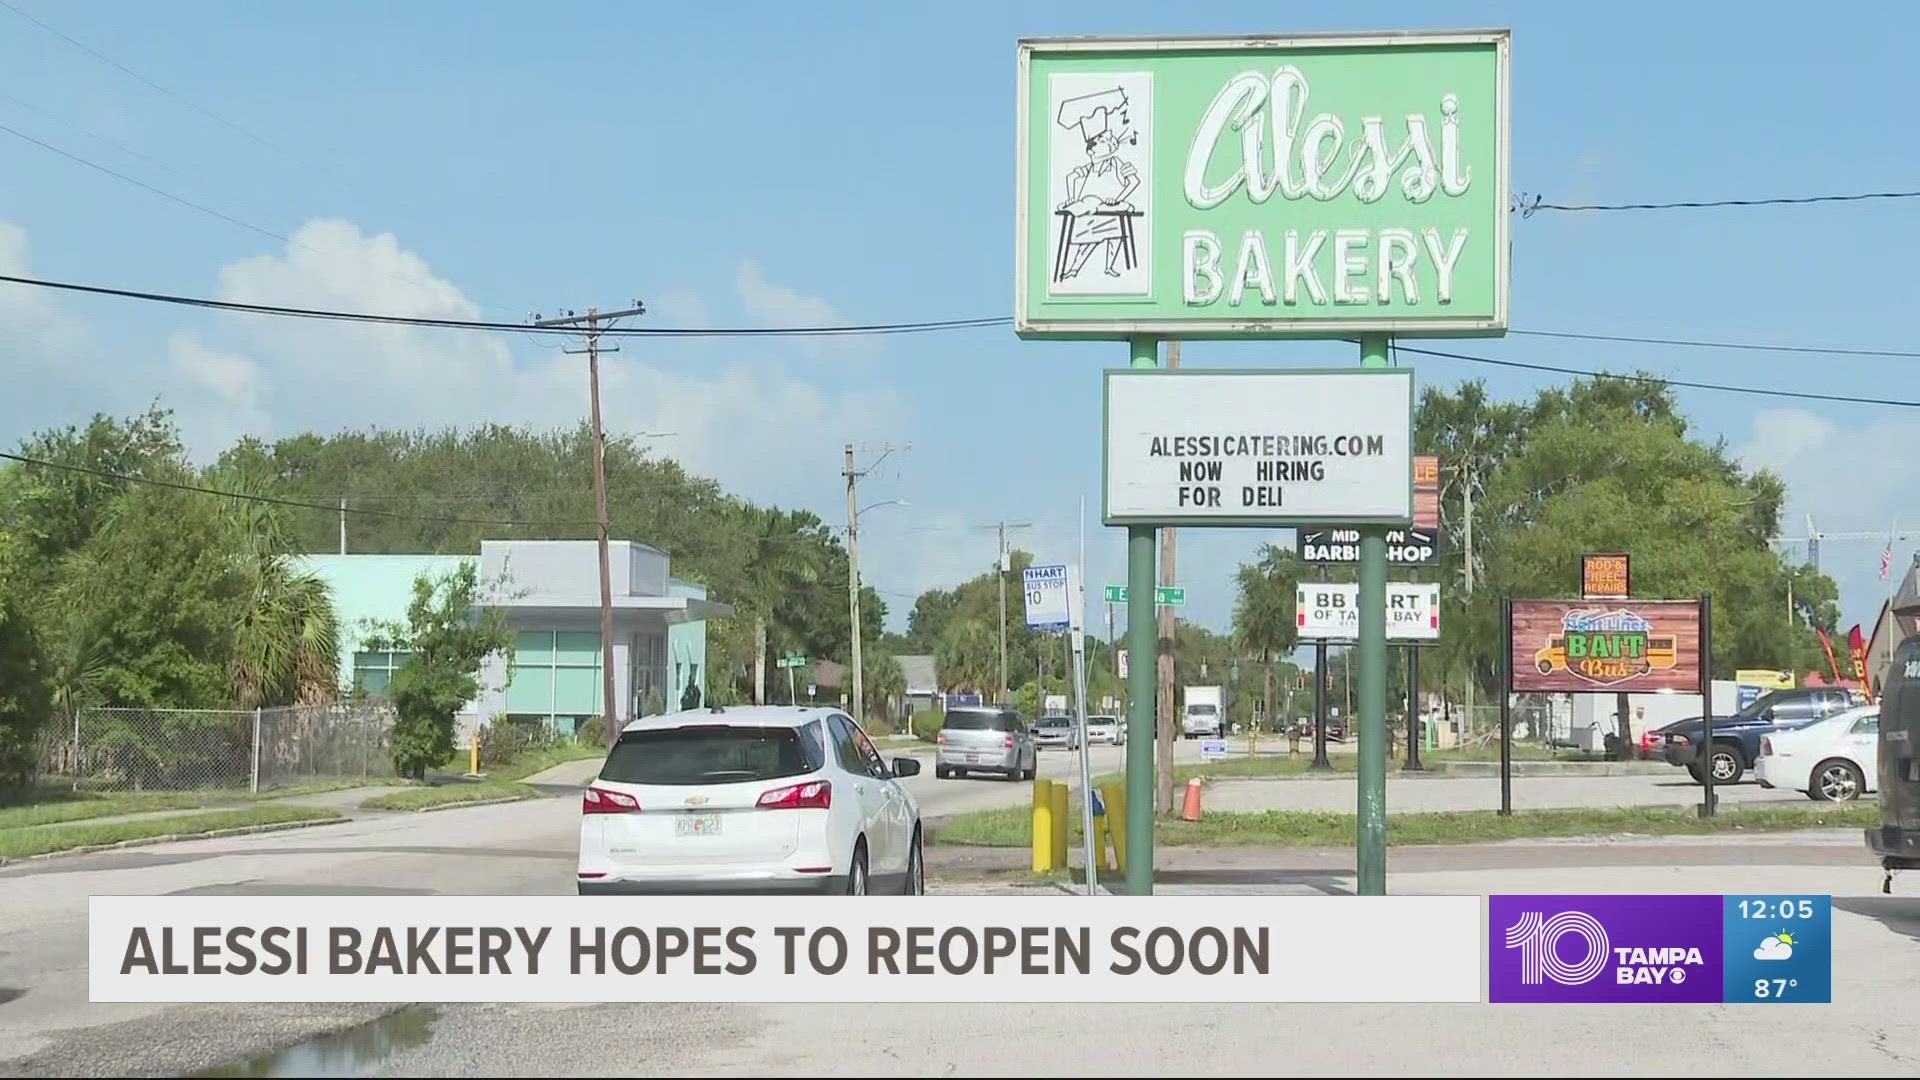 With cleanup and repairs underway, owners of the iconic Tampa bakery are making plans to reopen.